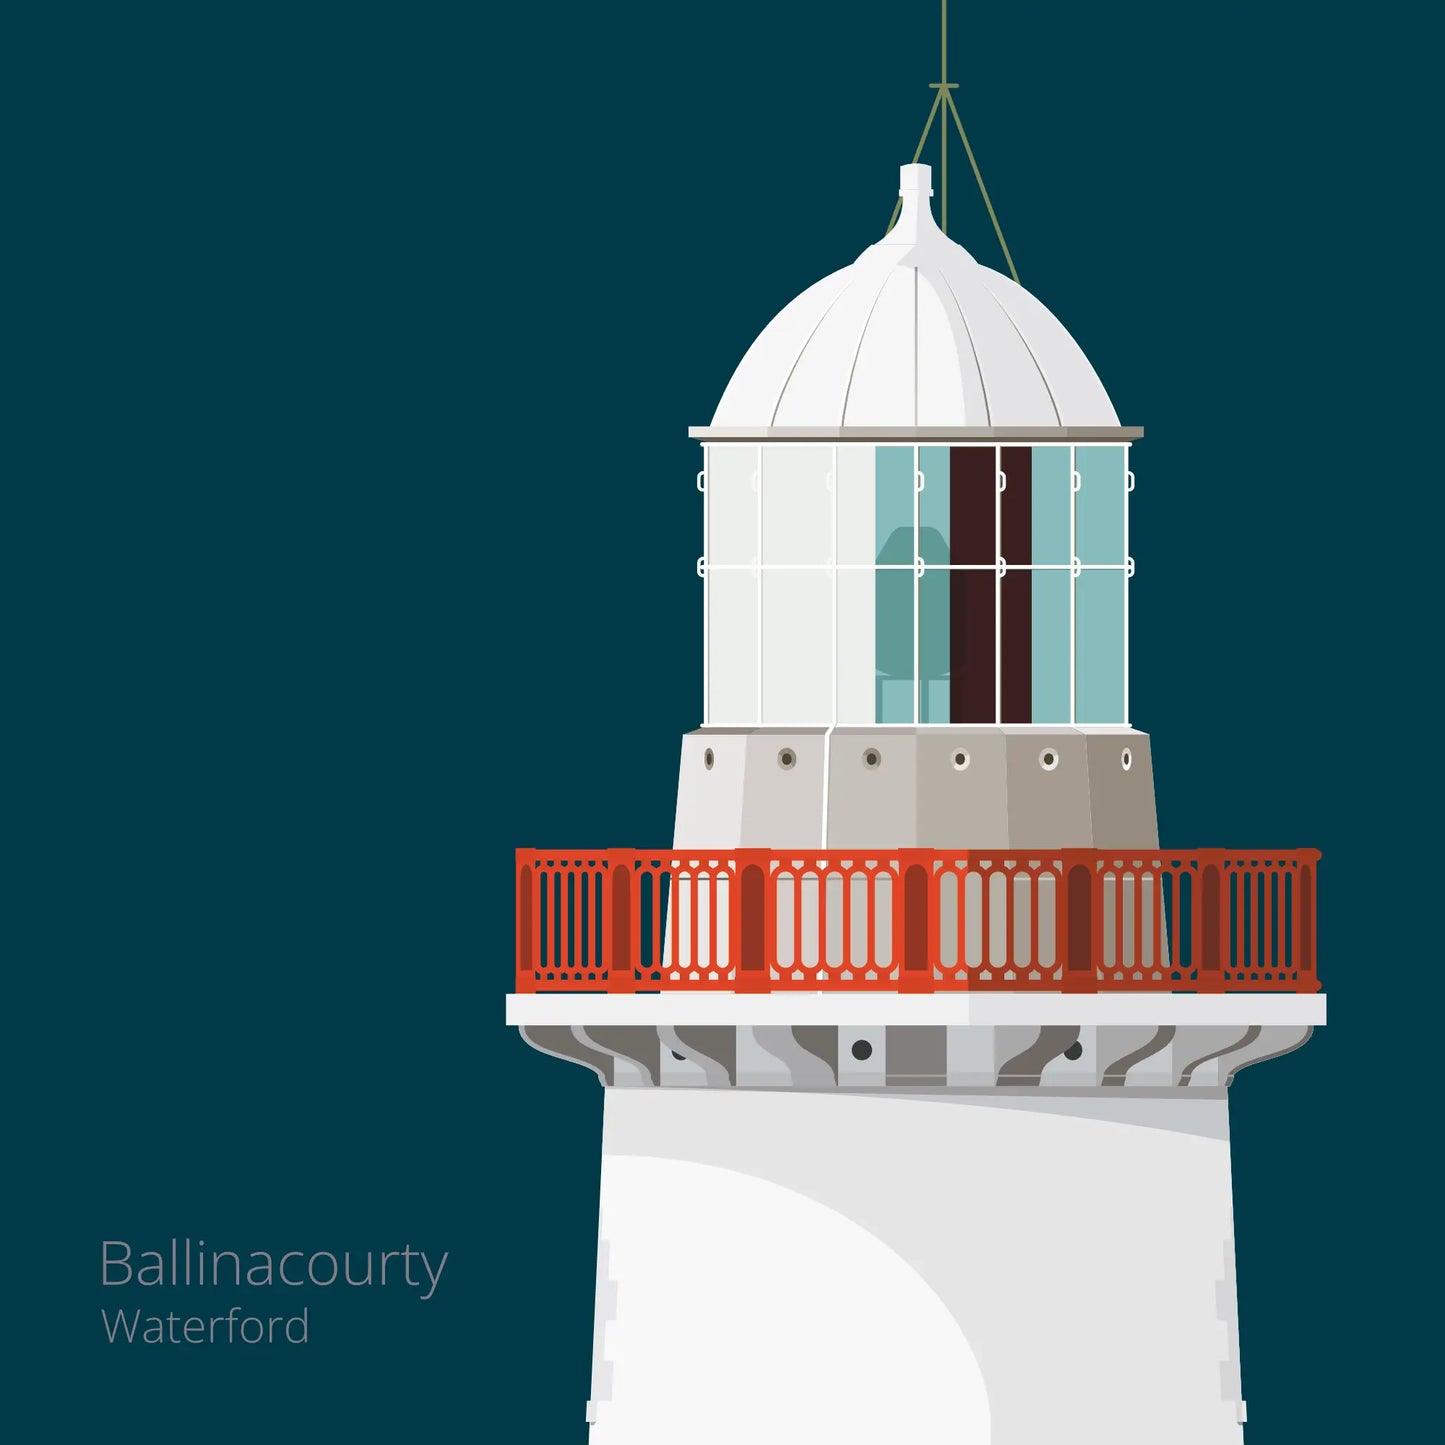 Illustration of Ballinacourty lighthouse on a midnight blue background